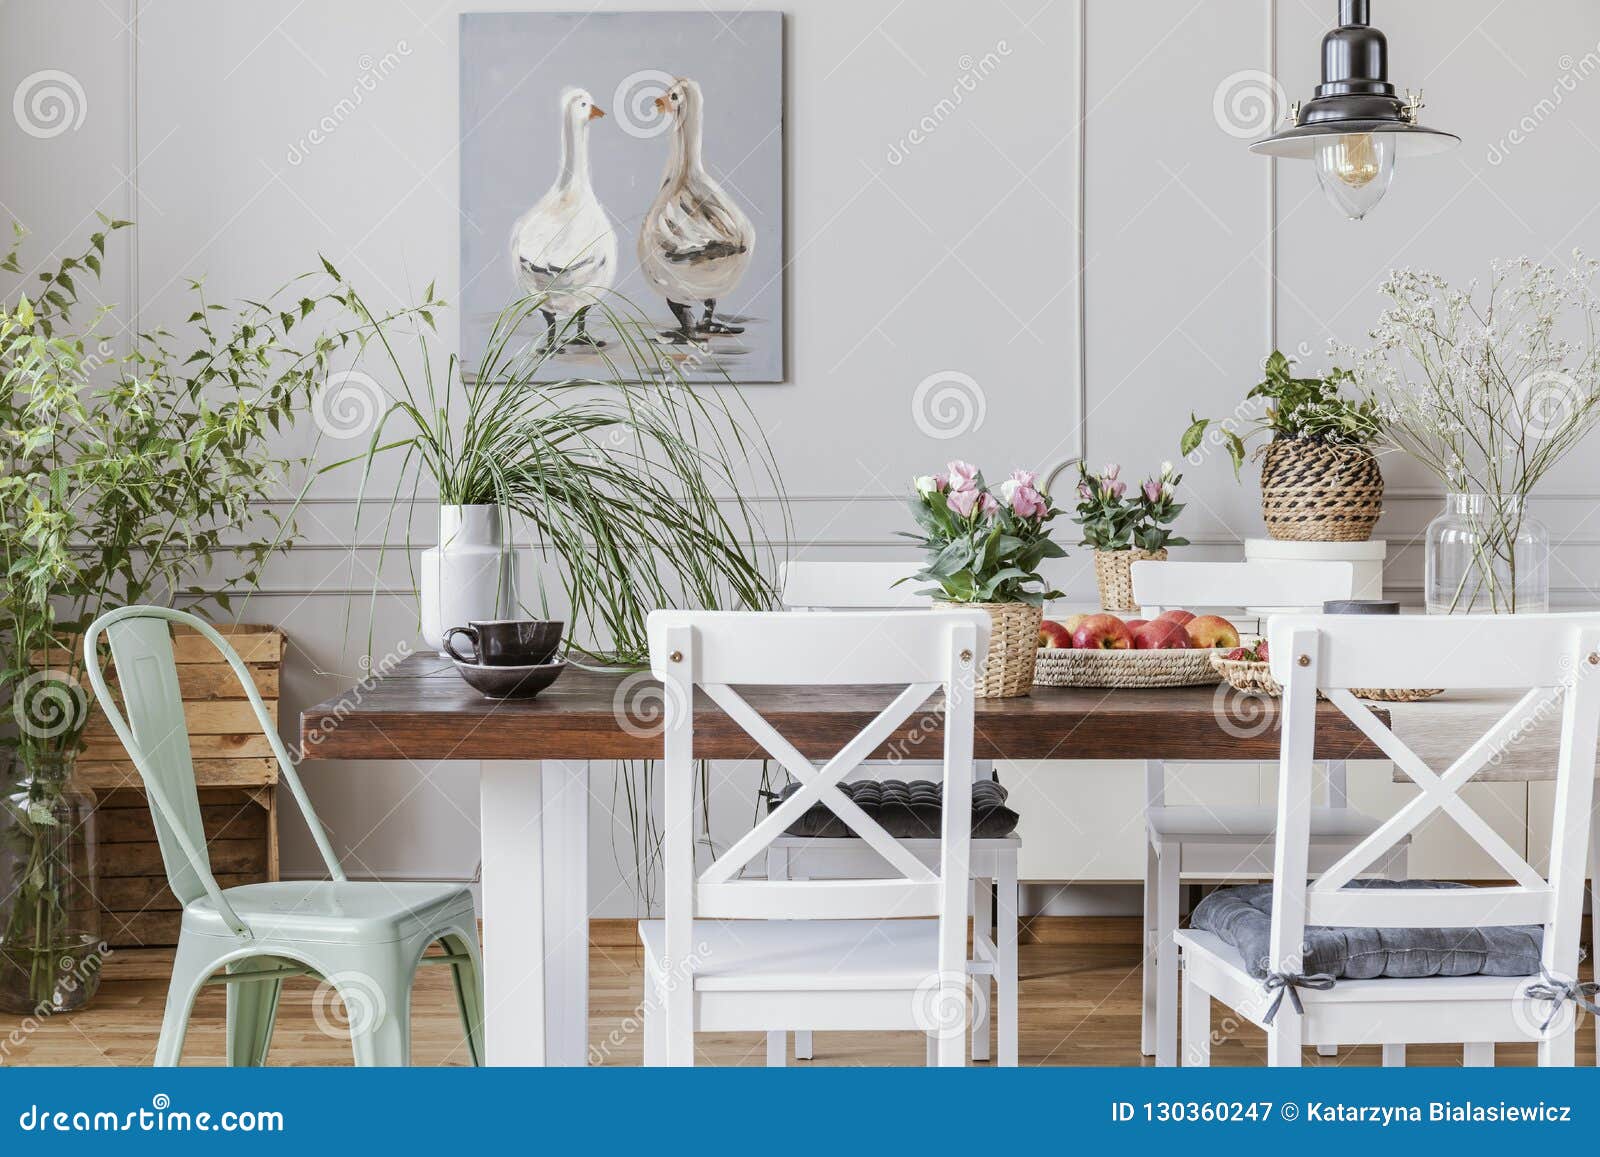 real photo of plants in a rustical dining room interior with a table, chairs, painting with ducks